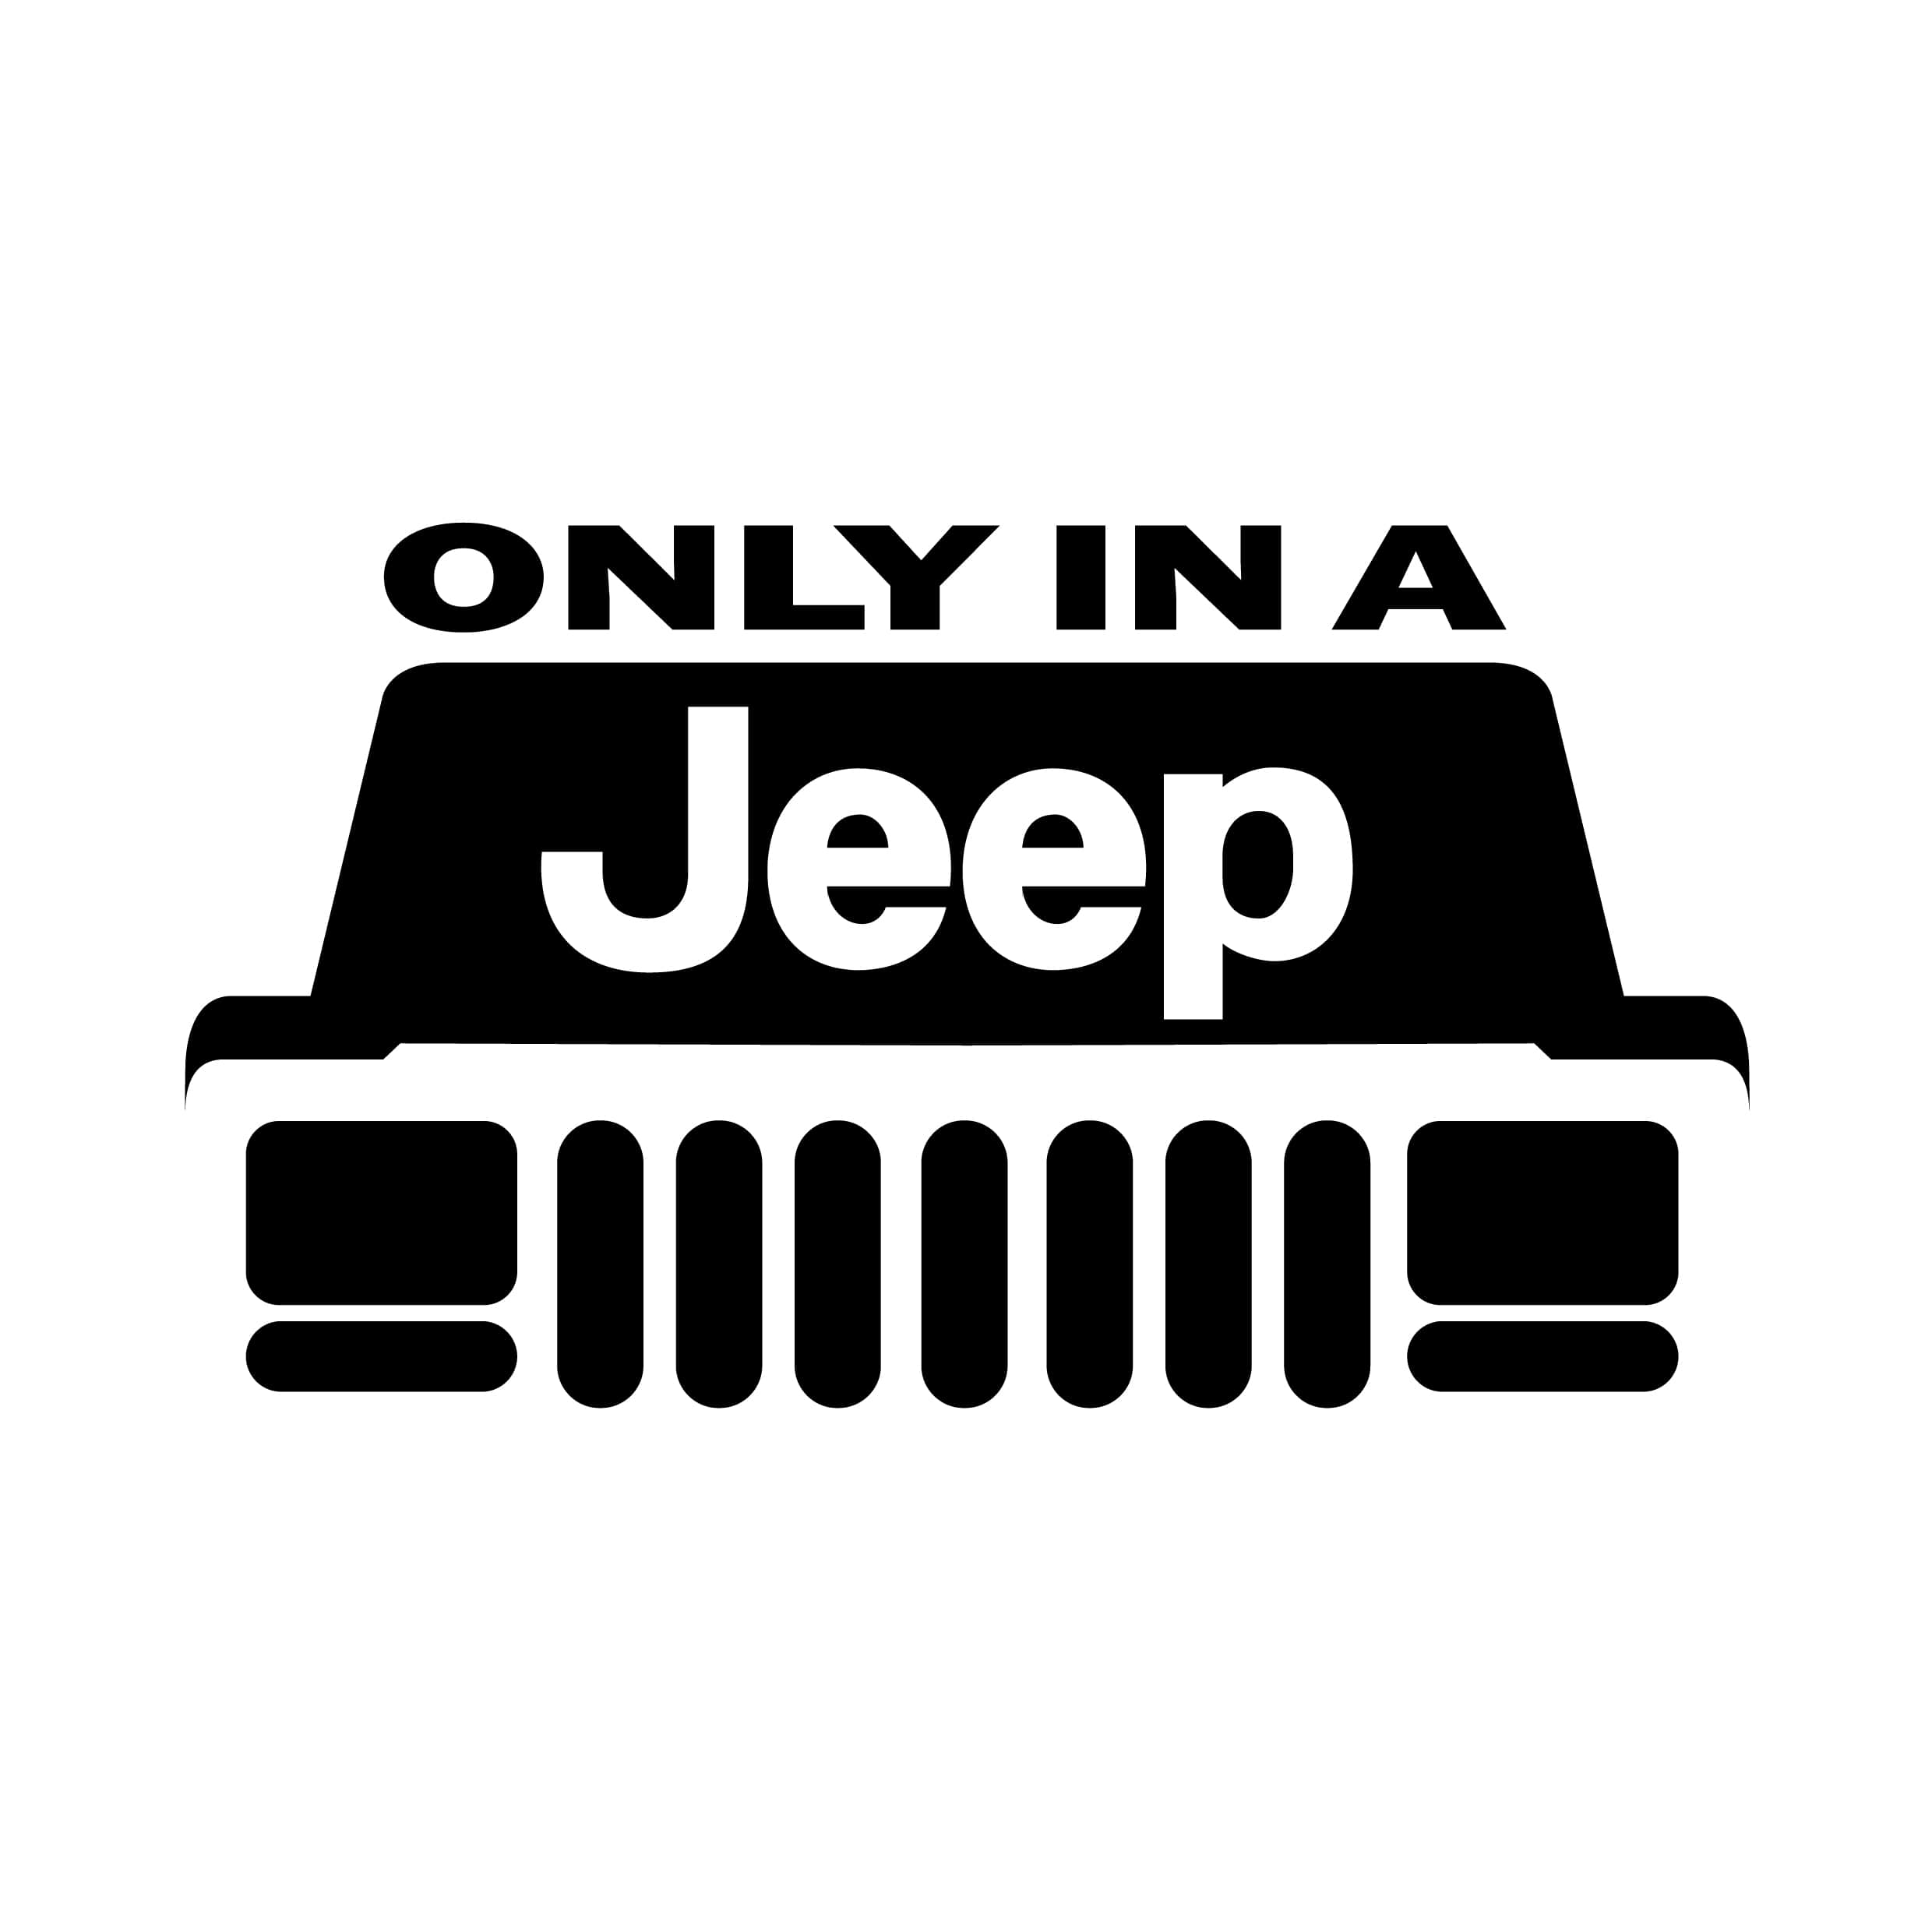 stickers-only-in-a-jeep-ref12-autocollant-4x4-sticker-suv-off-road-autocollants-decals-sponsors-tuning-rallye-voiture-logo-min